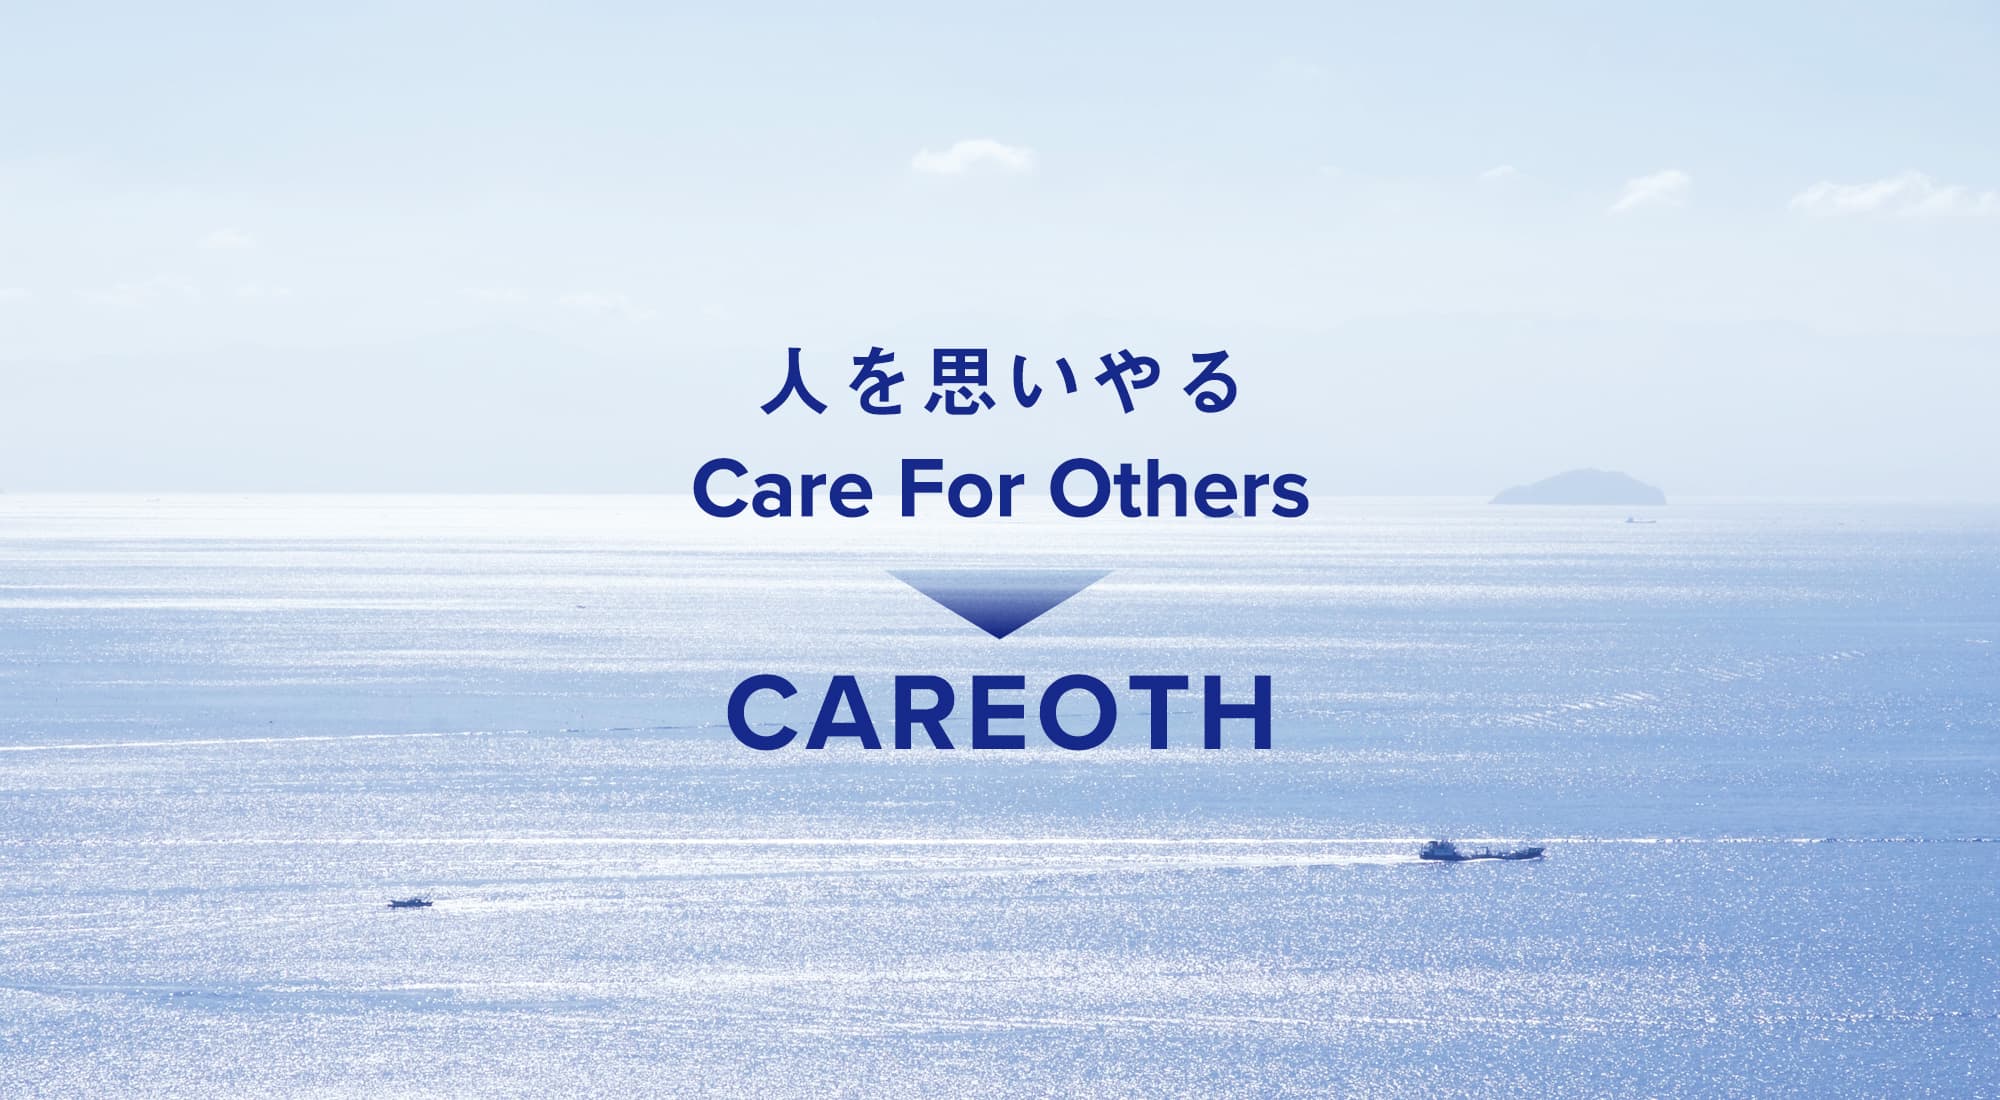 CARE FOR OTHERS→CAREOTH